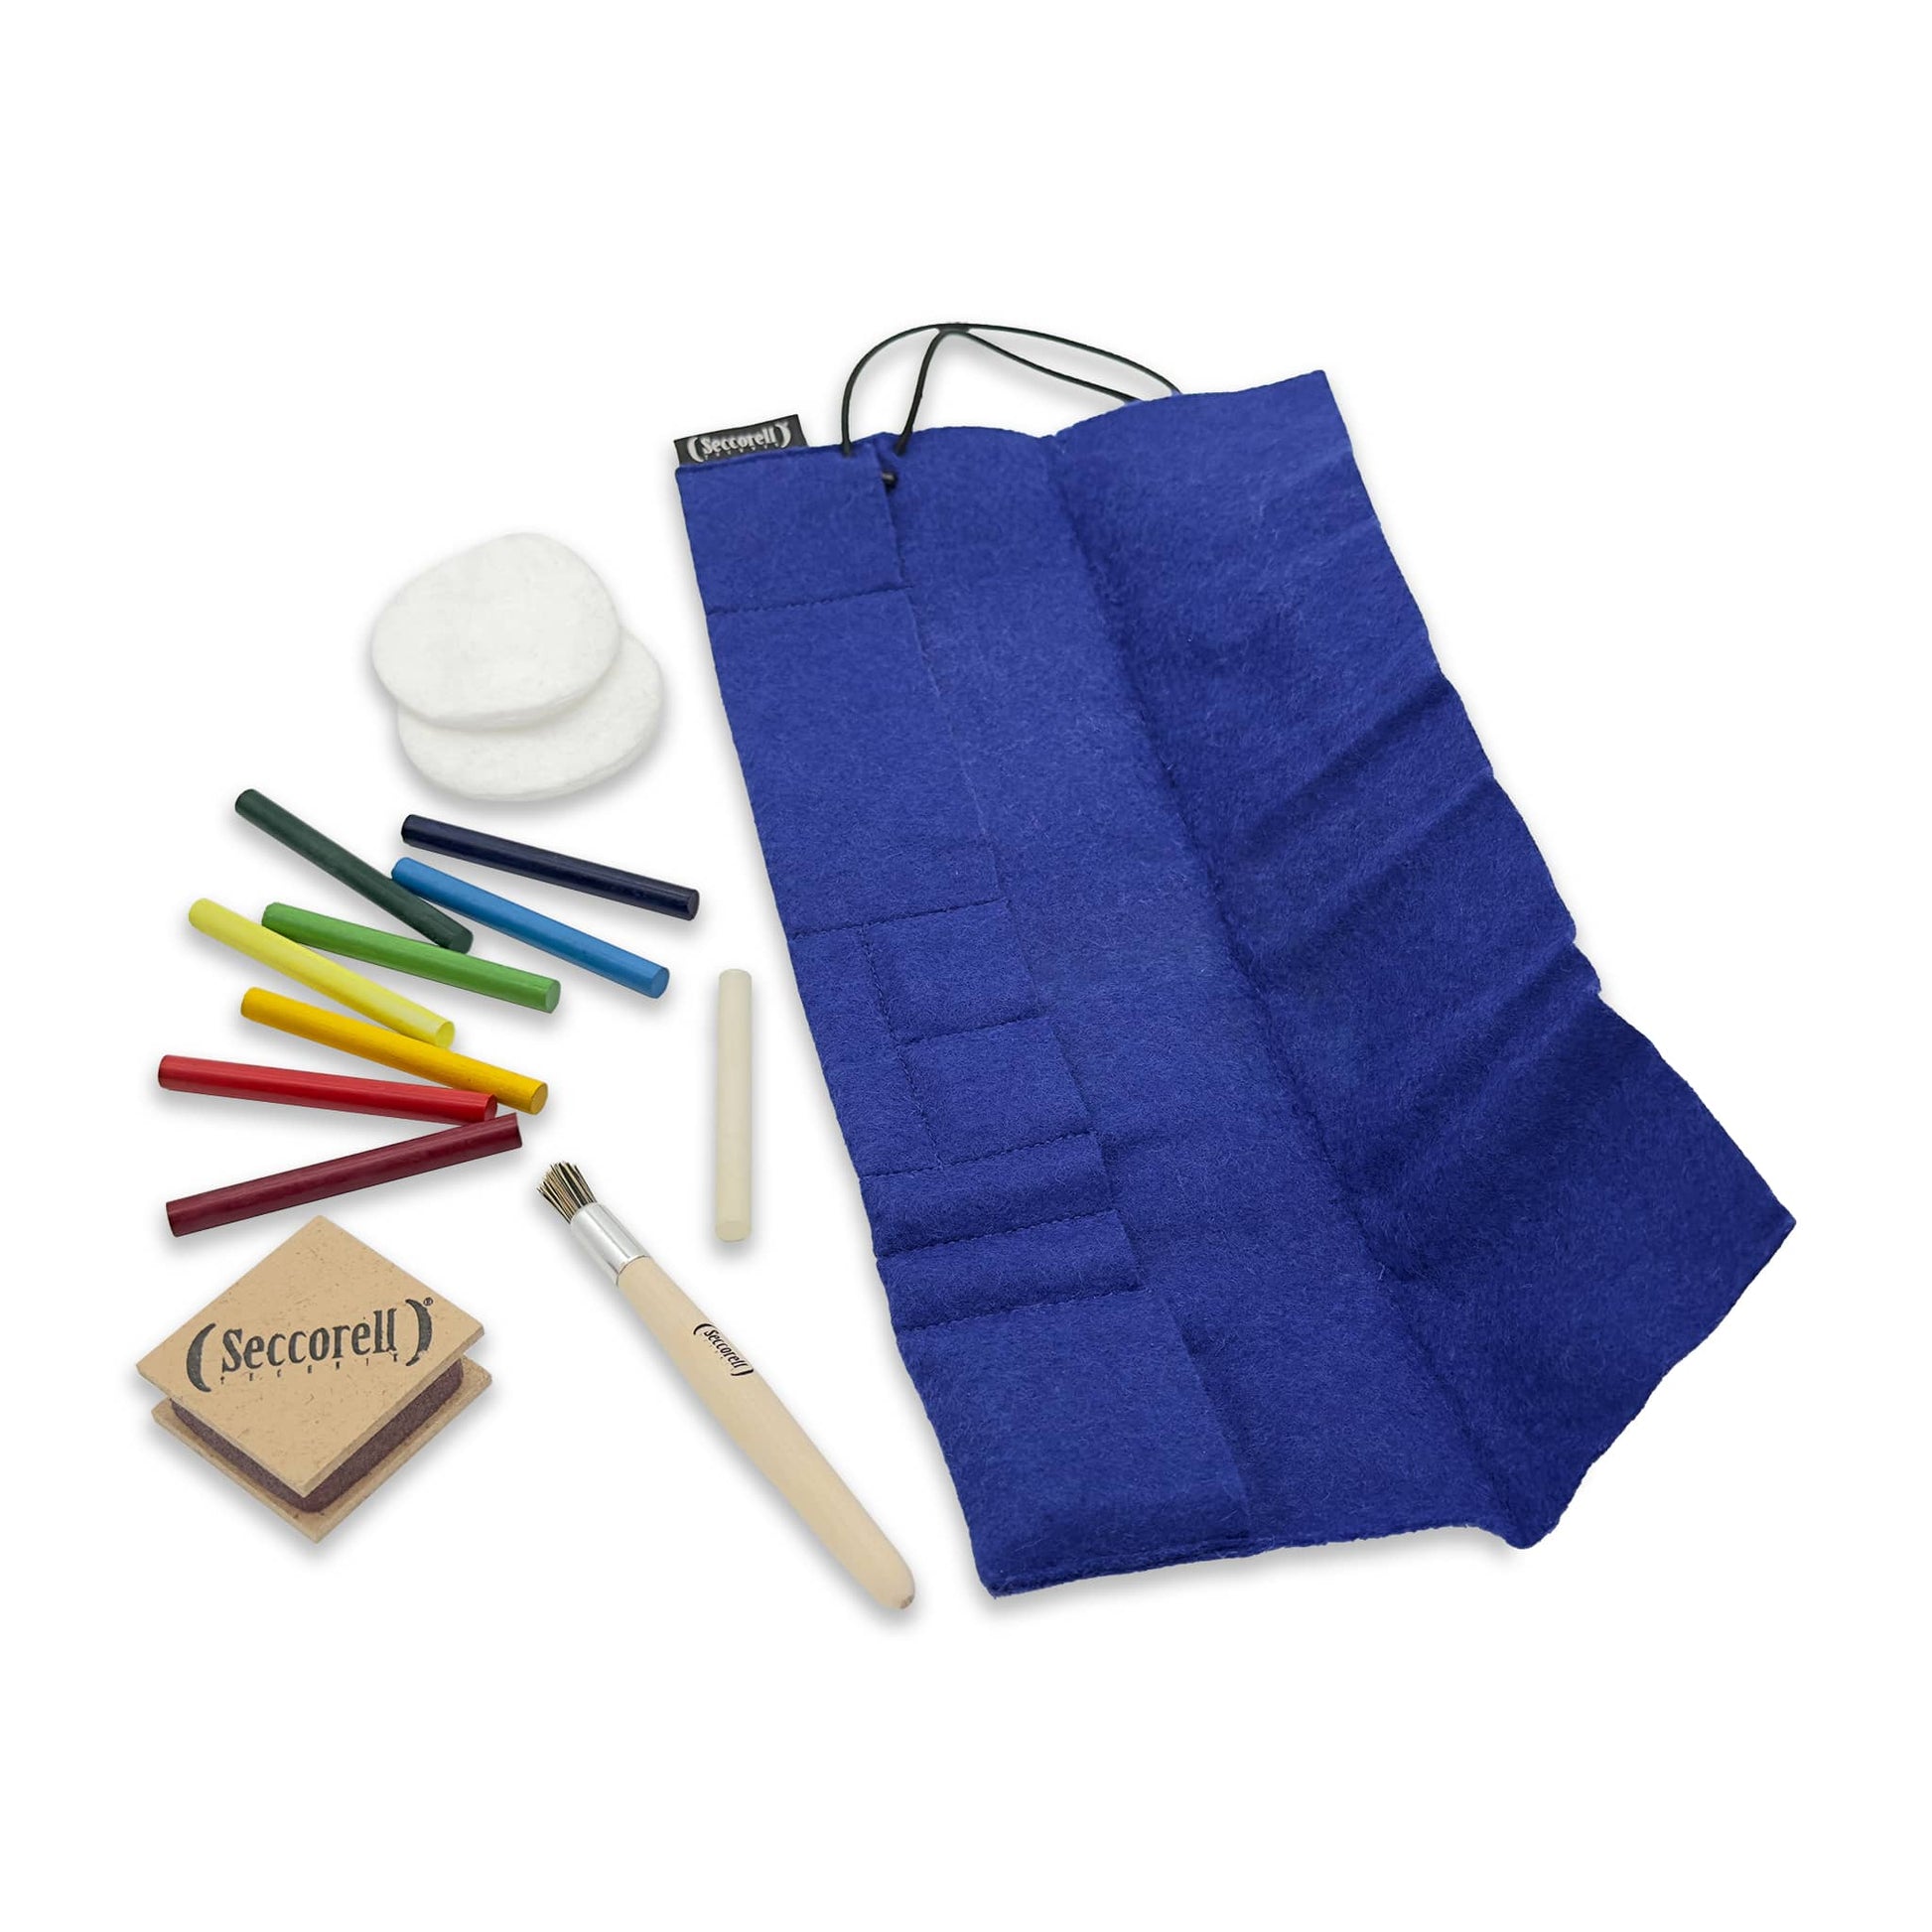 Seccorell felt roll bag, practical for on the go, including paint sticks, rubbing block and brushes, ideal for Seccorell artists.